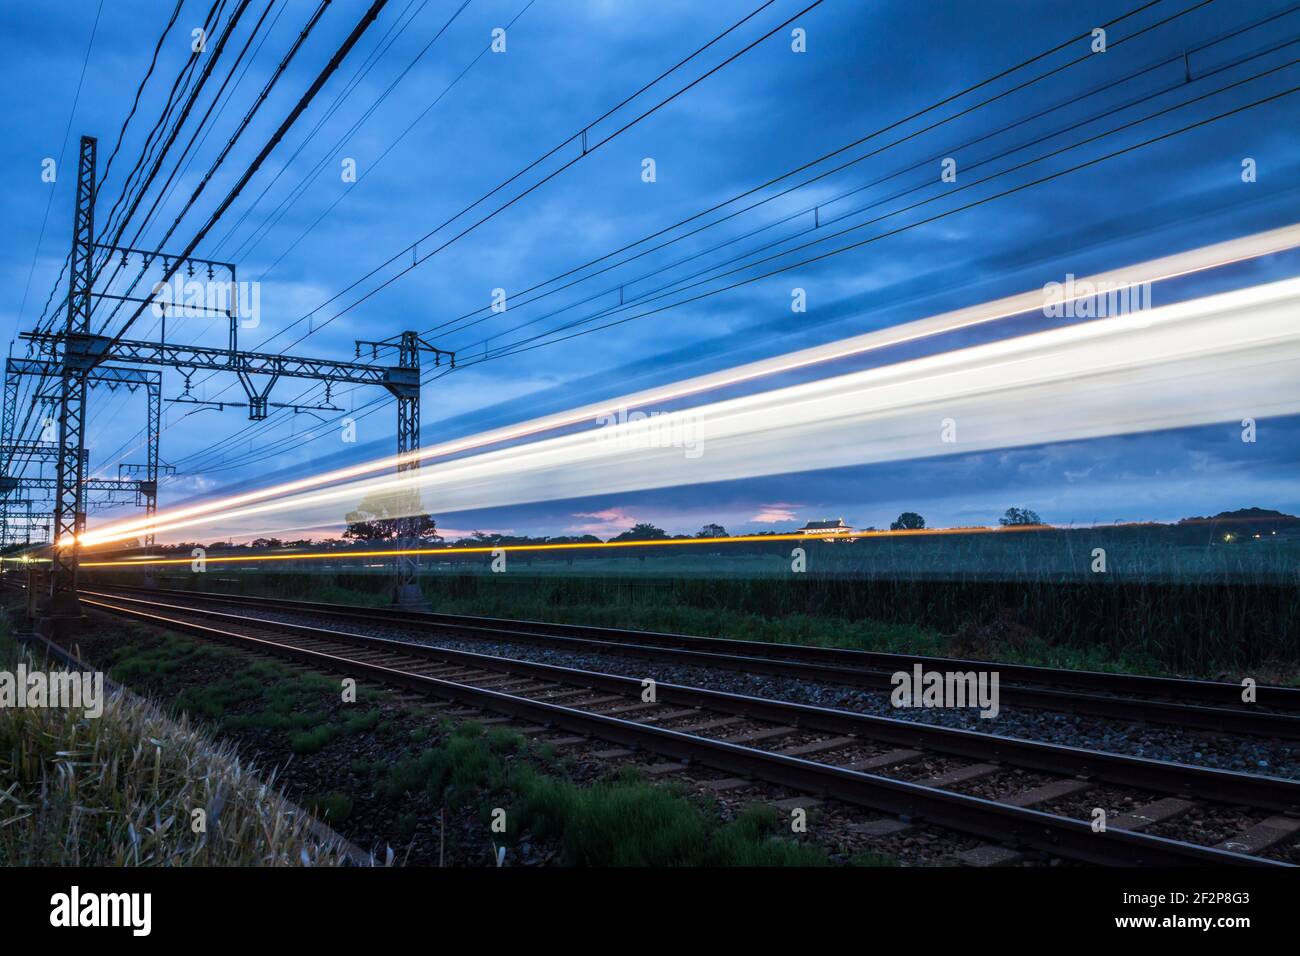 Long exposure of a train rushing by on a railway line at sunset in Nara, Japan Stock Photo